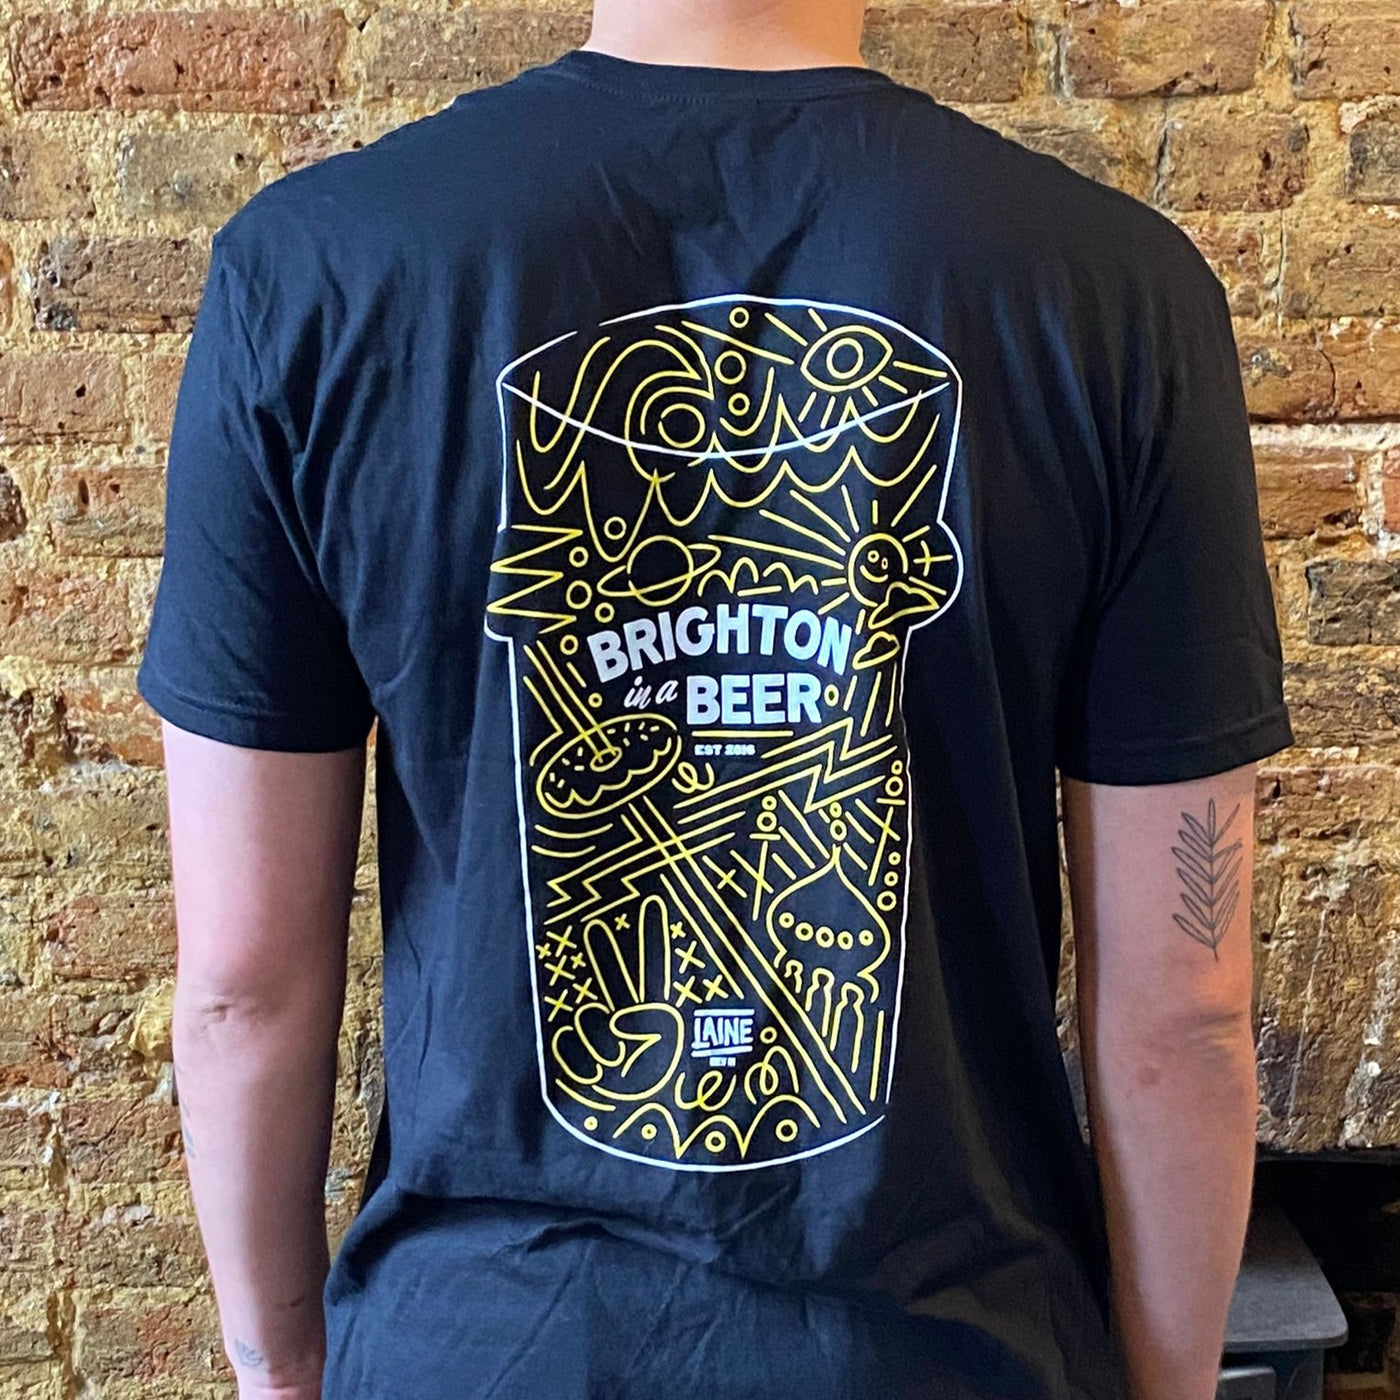 The Classic Brighton Beer T-shirt